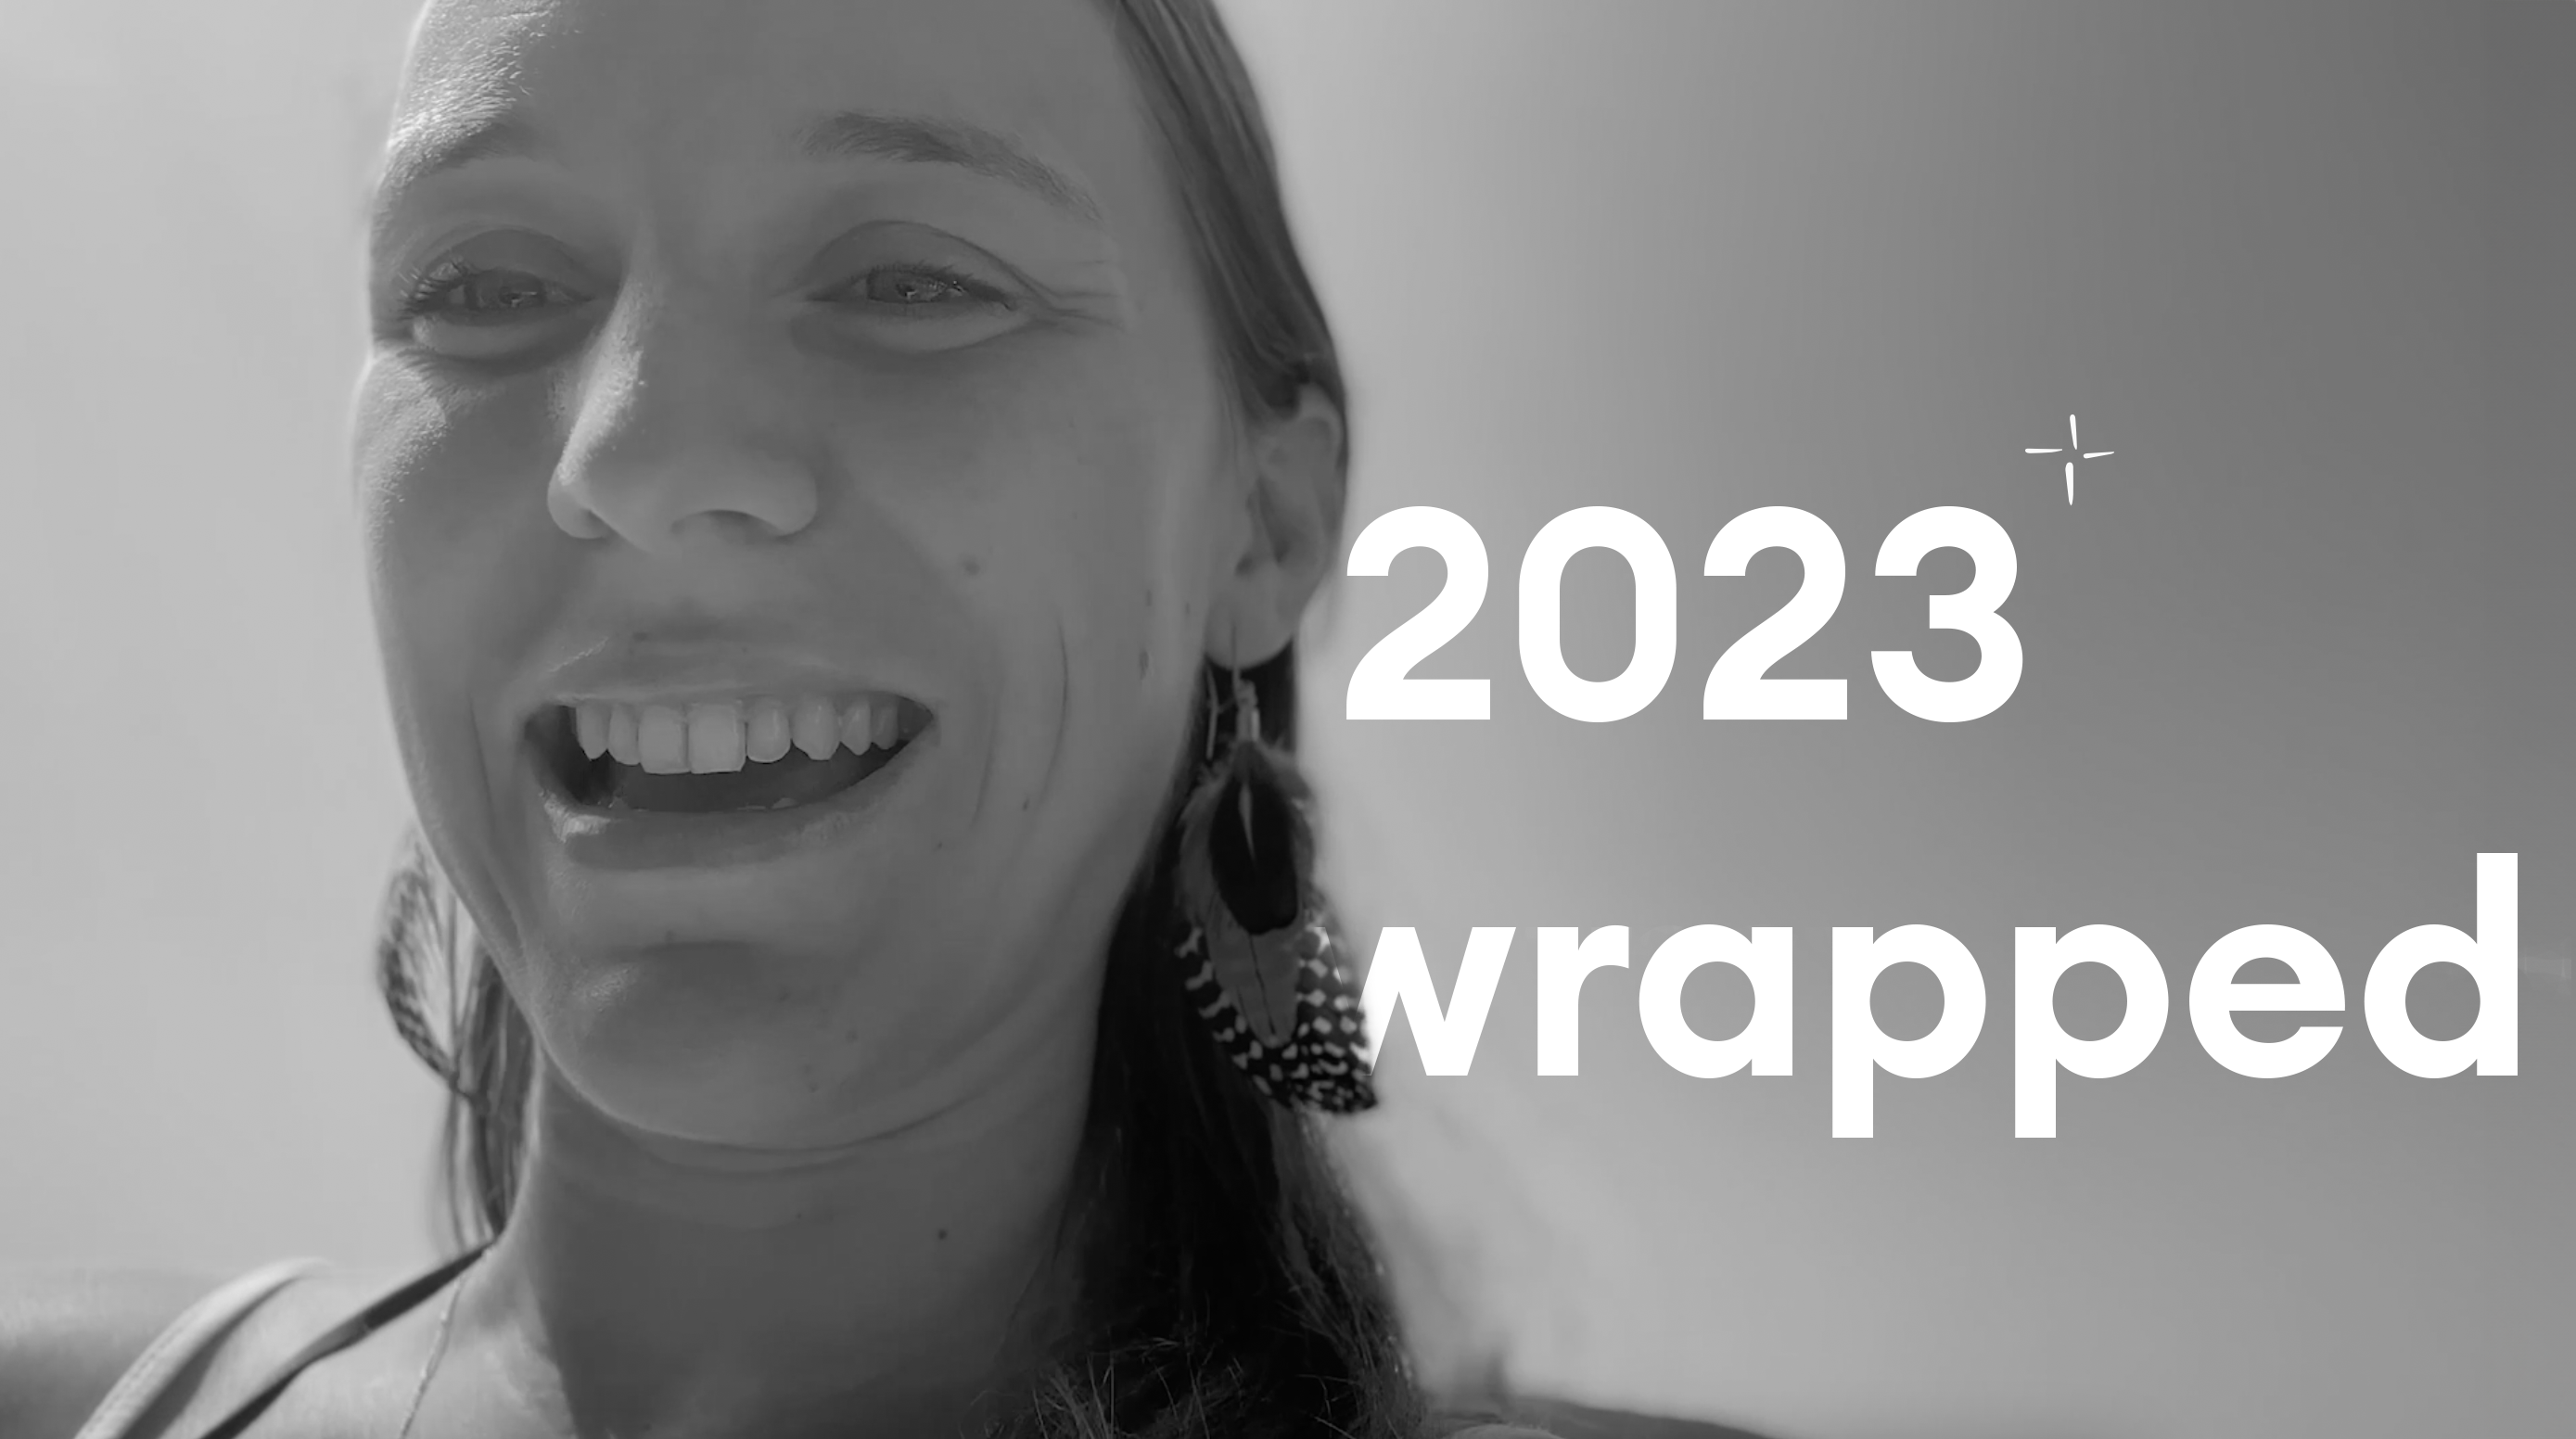 Team Seenit | 2023 wrapped